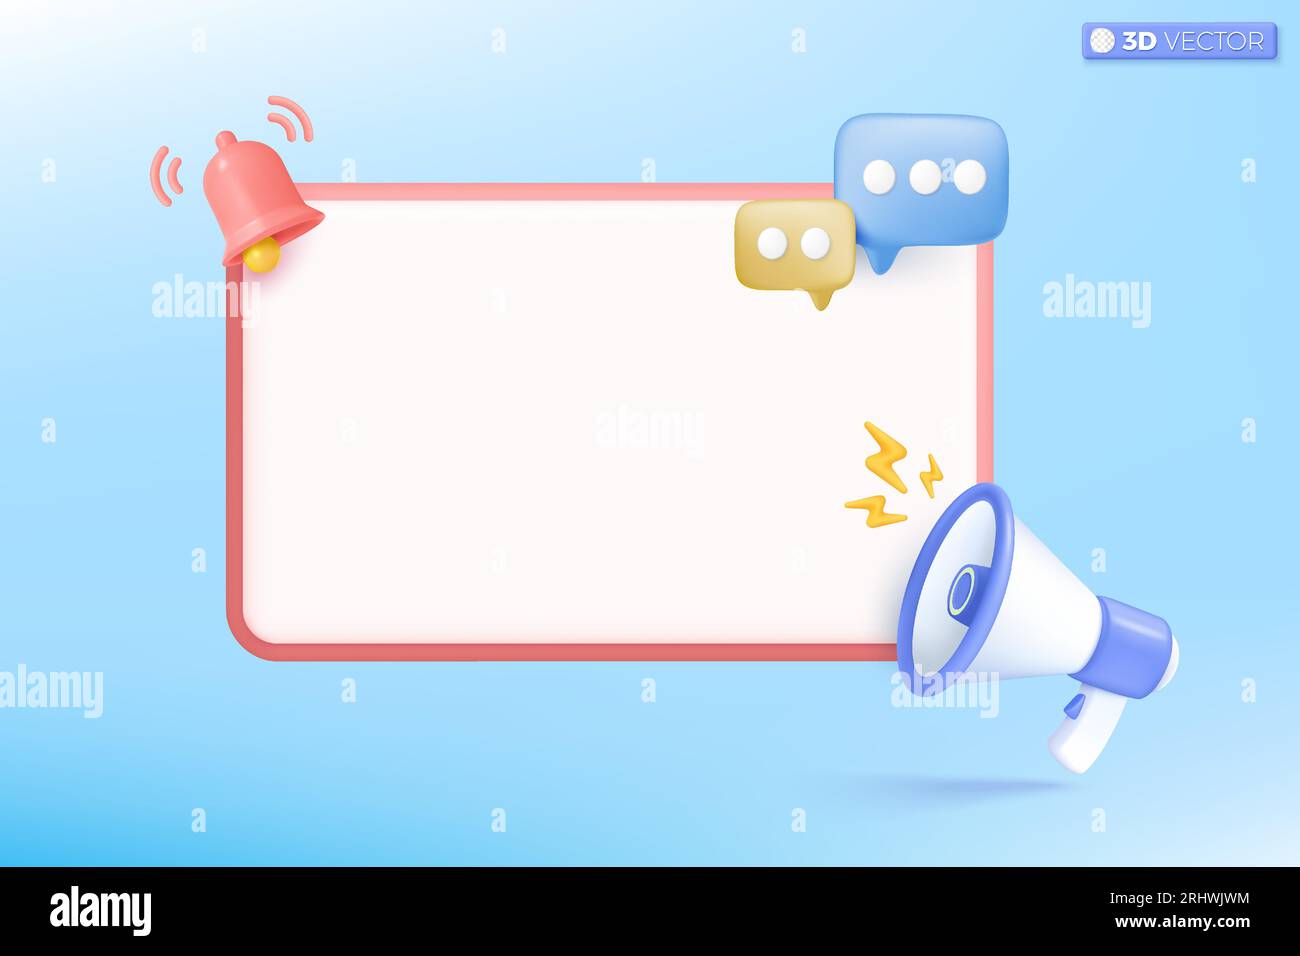 https://c8.alamy.com/comp/2RHWJWM/3d-megaphone-speaker-icon-symbol-notification-bell-speech-bubble-loudspeaker-announce-discount-promotion-sell-reduced-prices-concept-3d-vector-is-2RHWJWM.jpg